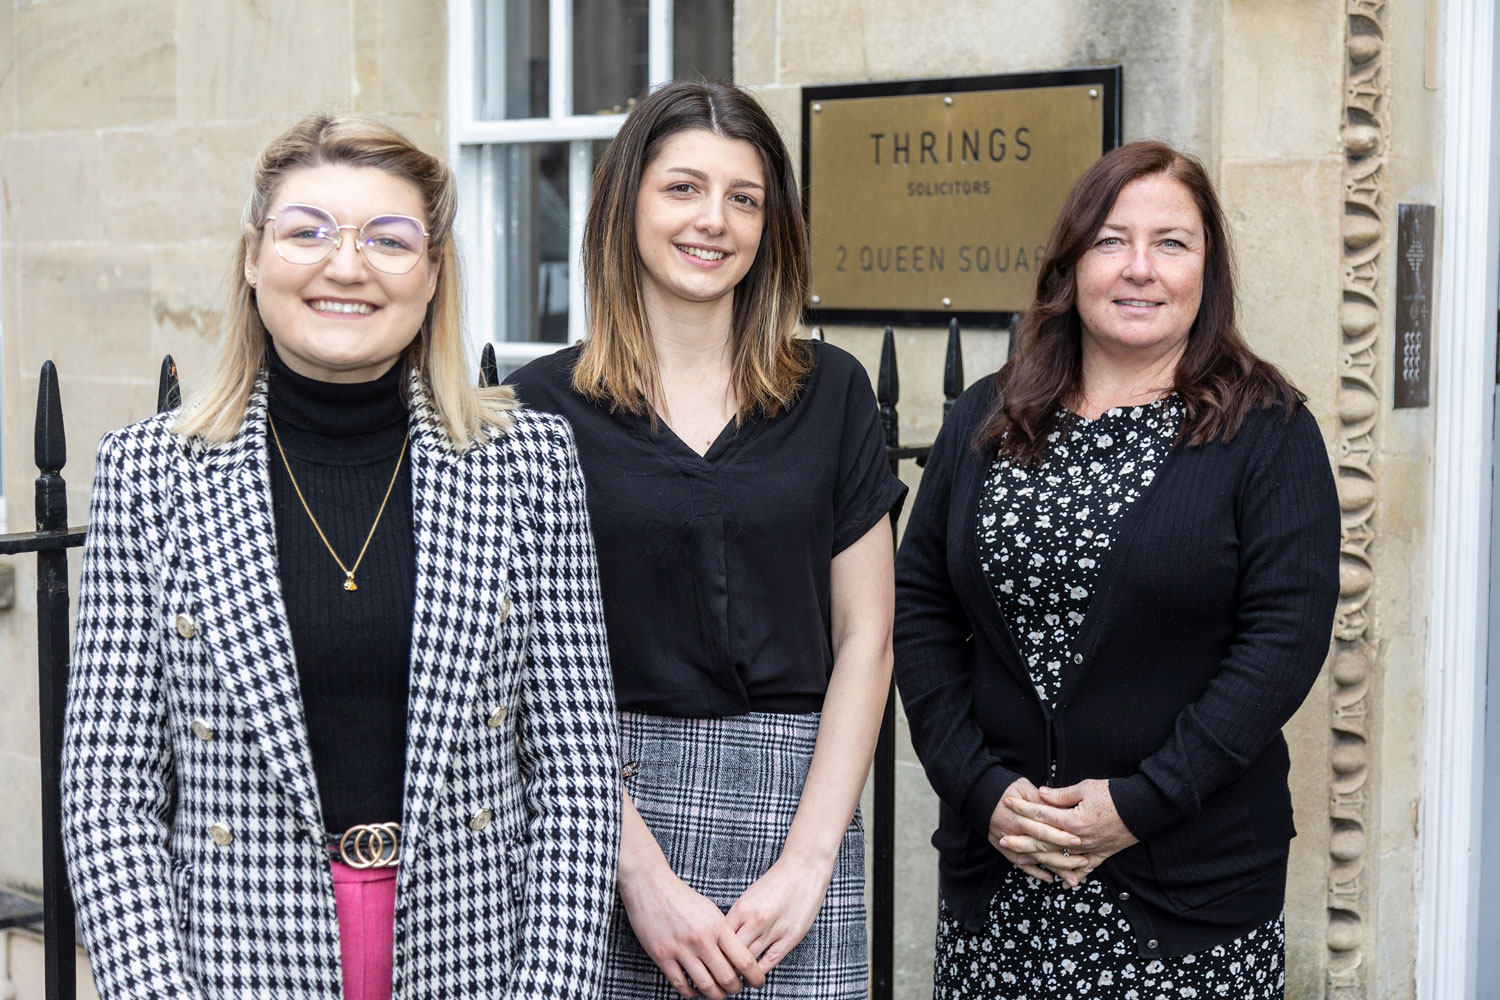 Thrings has welcomed the qualification of four new lawyers